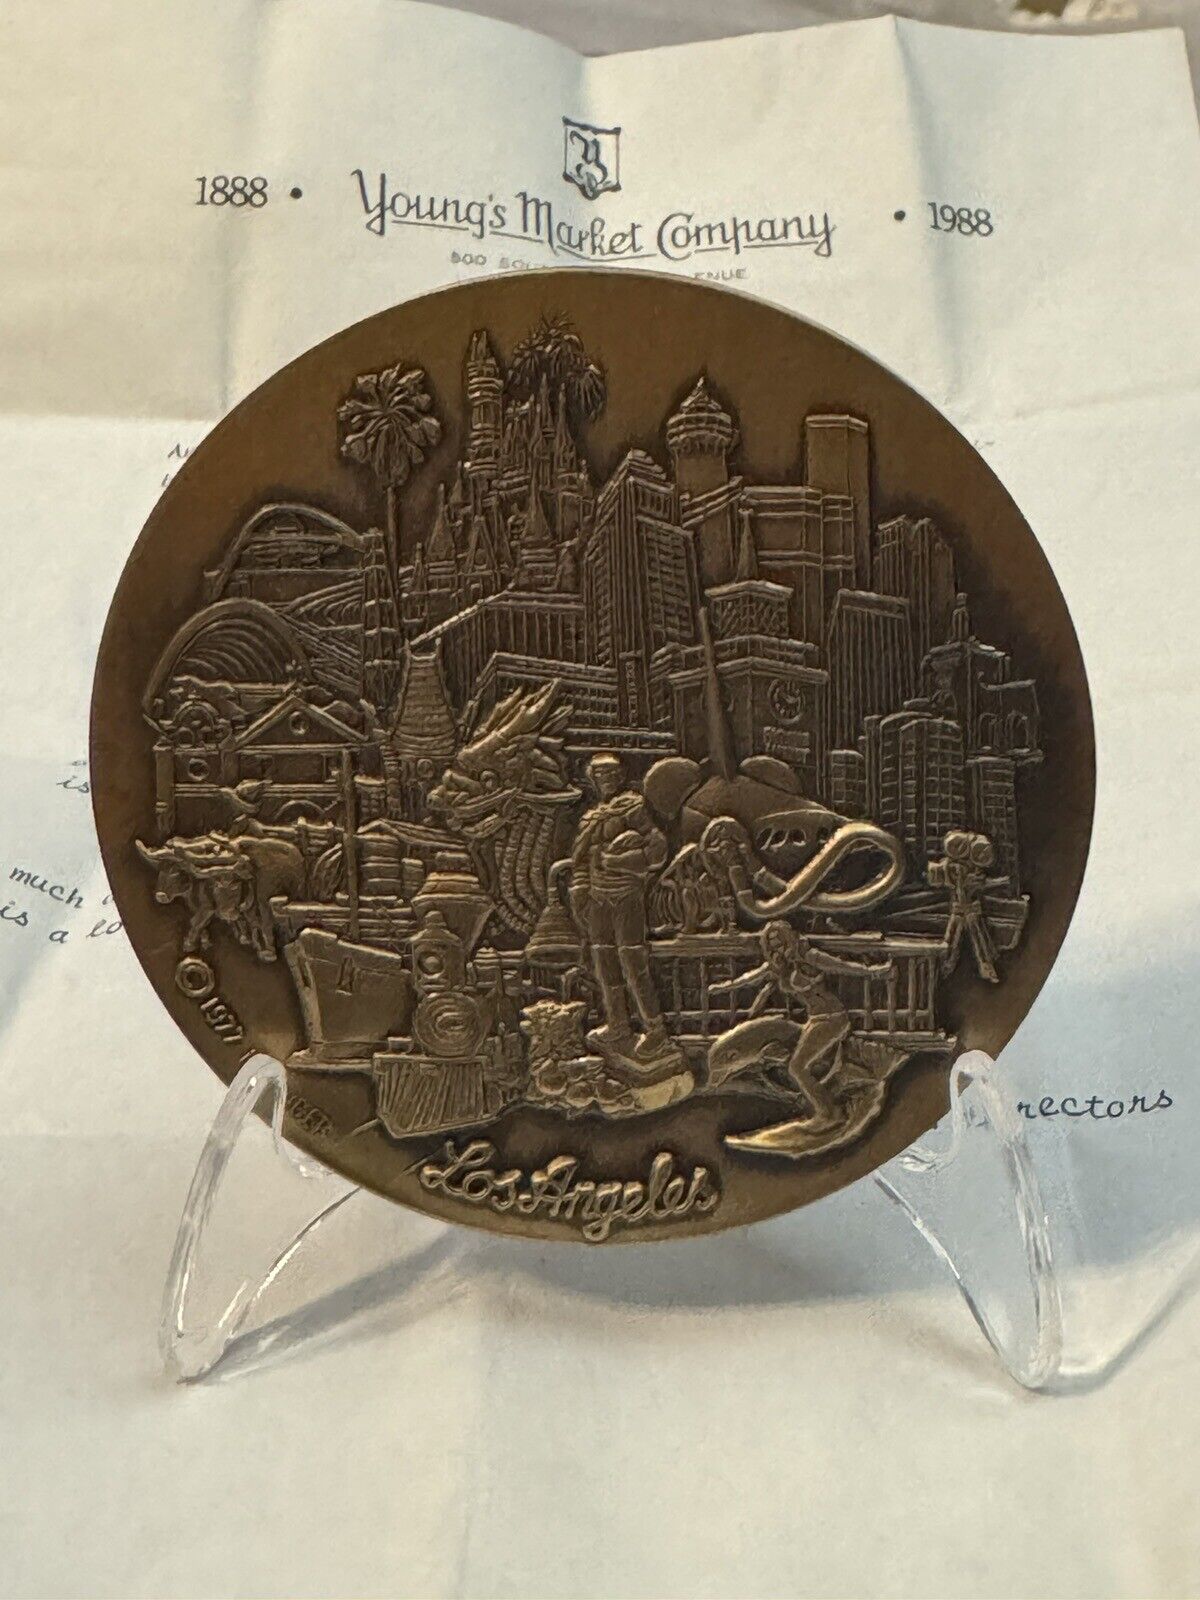 1977 K Mager Los Angeles 3” Bronze Medallion / 1988 Young’s Market Company